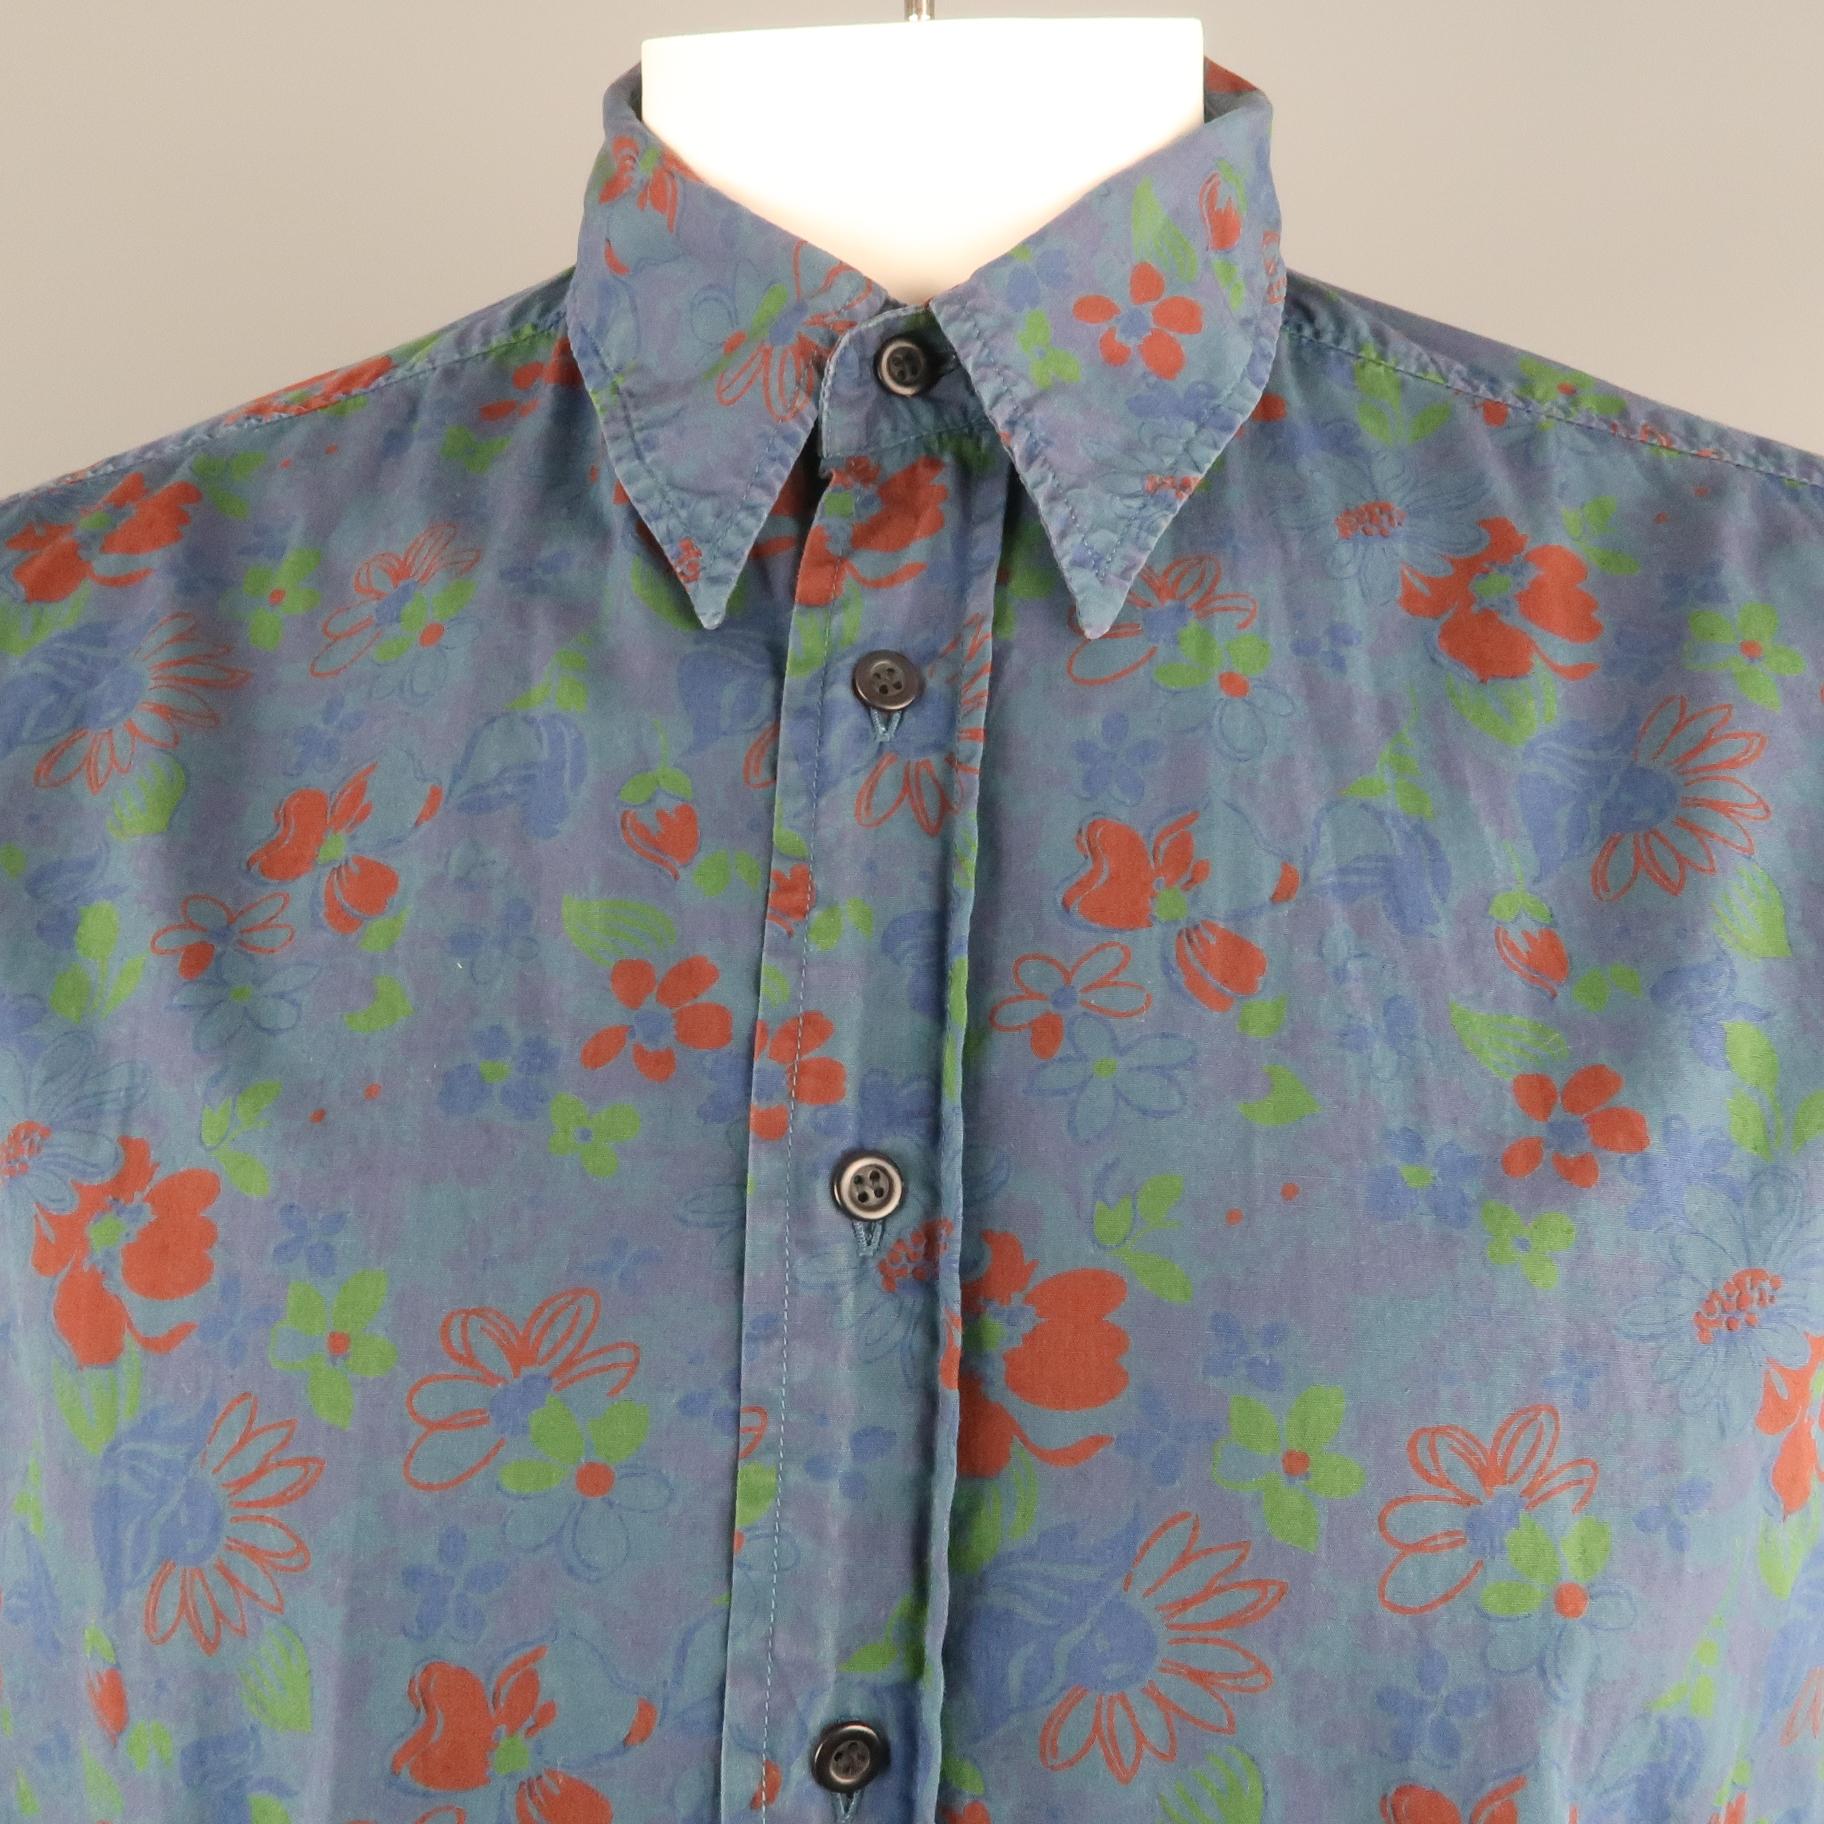 DRIES VAN NOTEN long sleeve shirt comes in a navy and brick floral cotton featuring a button up style and a spread collar.
 
Very Good Pre-Owned Condition.
Marked: 54
 
Measurements:
 
Shoulder: 18 in.
Chest: 47 in
Sleeve: 28.5 in.
Length: 24.5